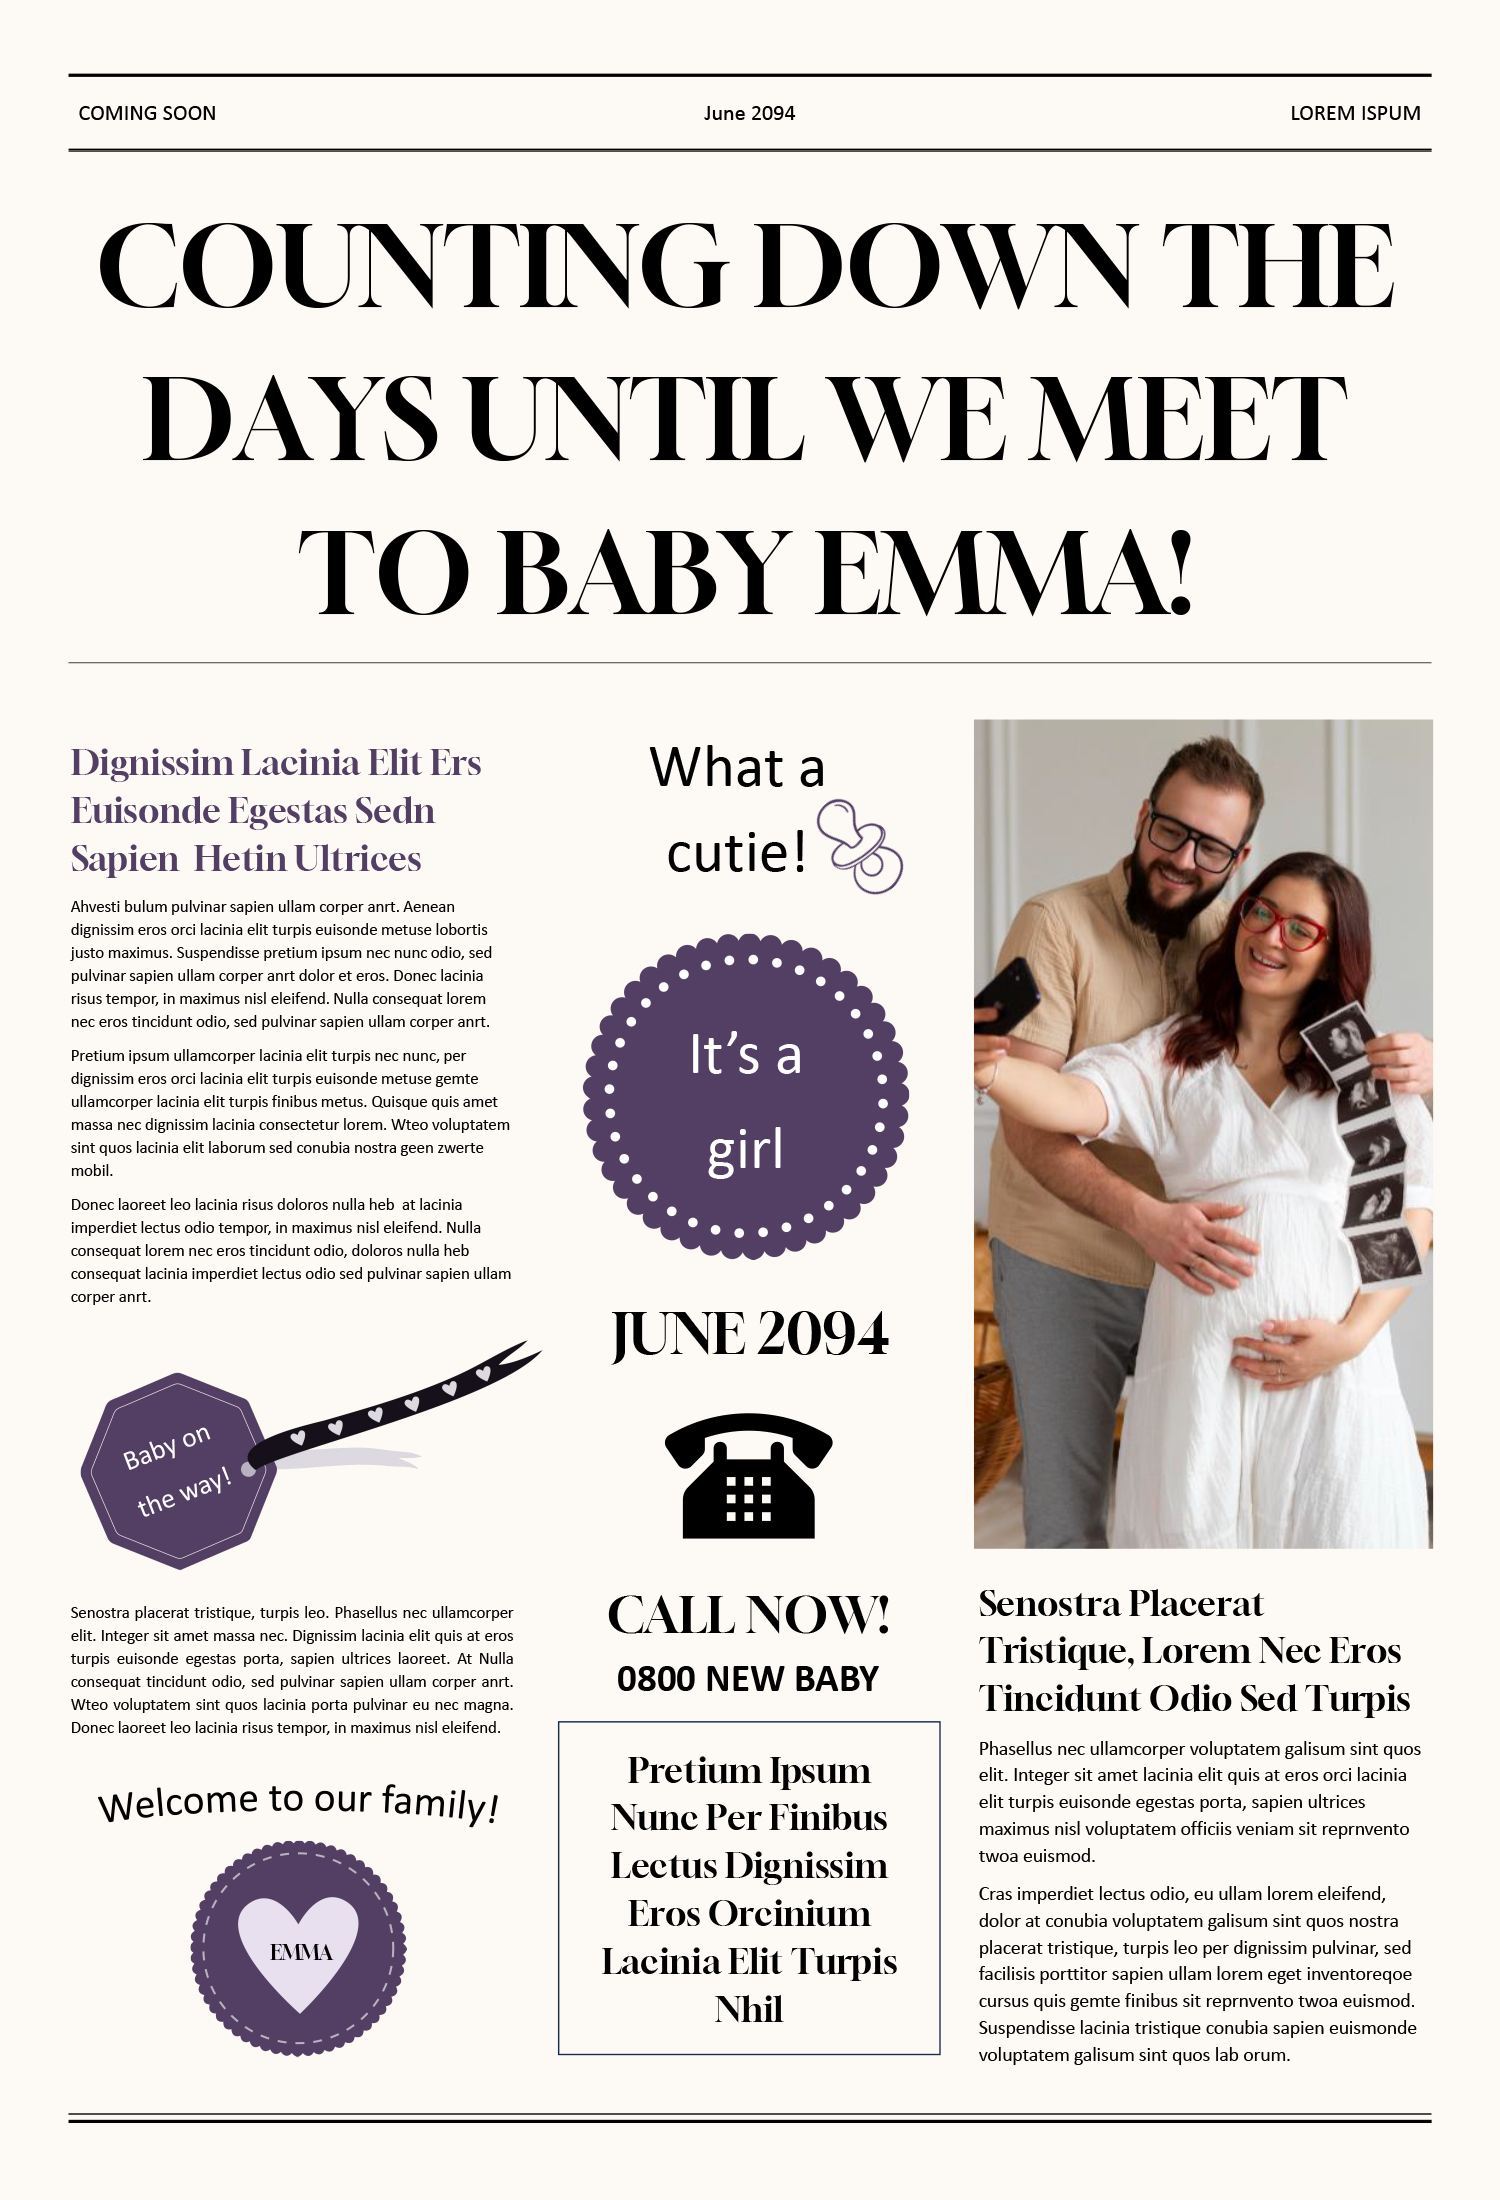 Broadsheet Baby Announcement Newspaper Template - Page 02